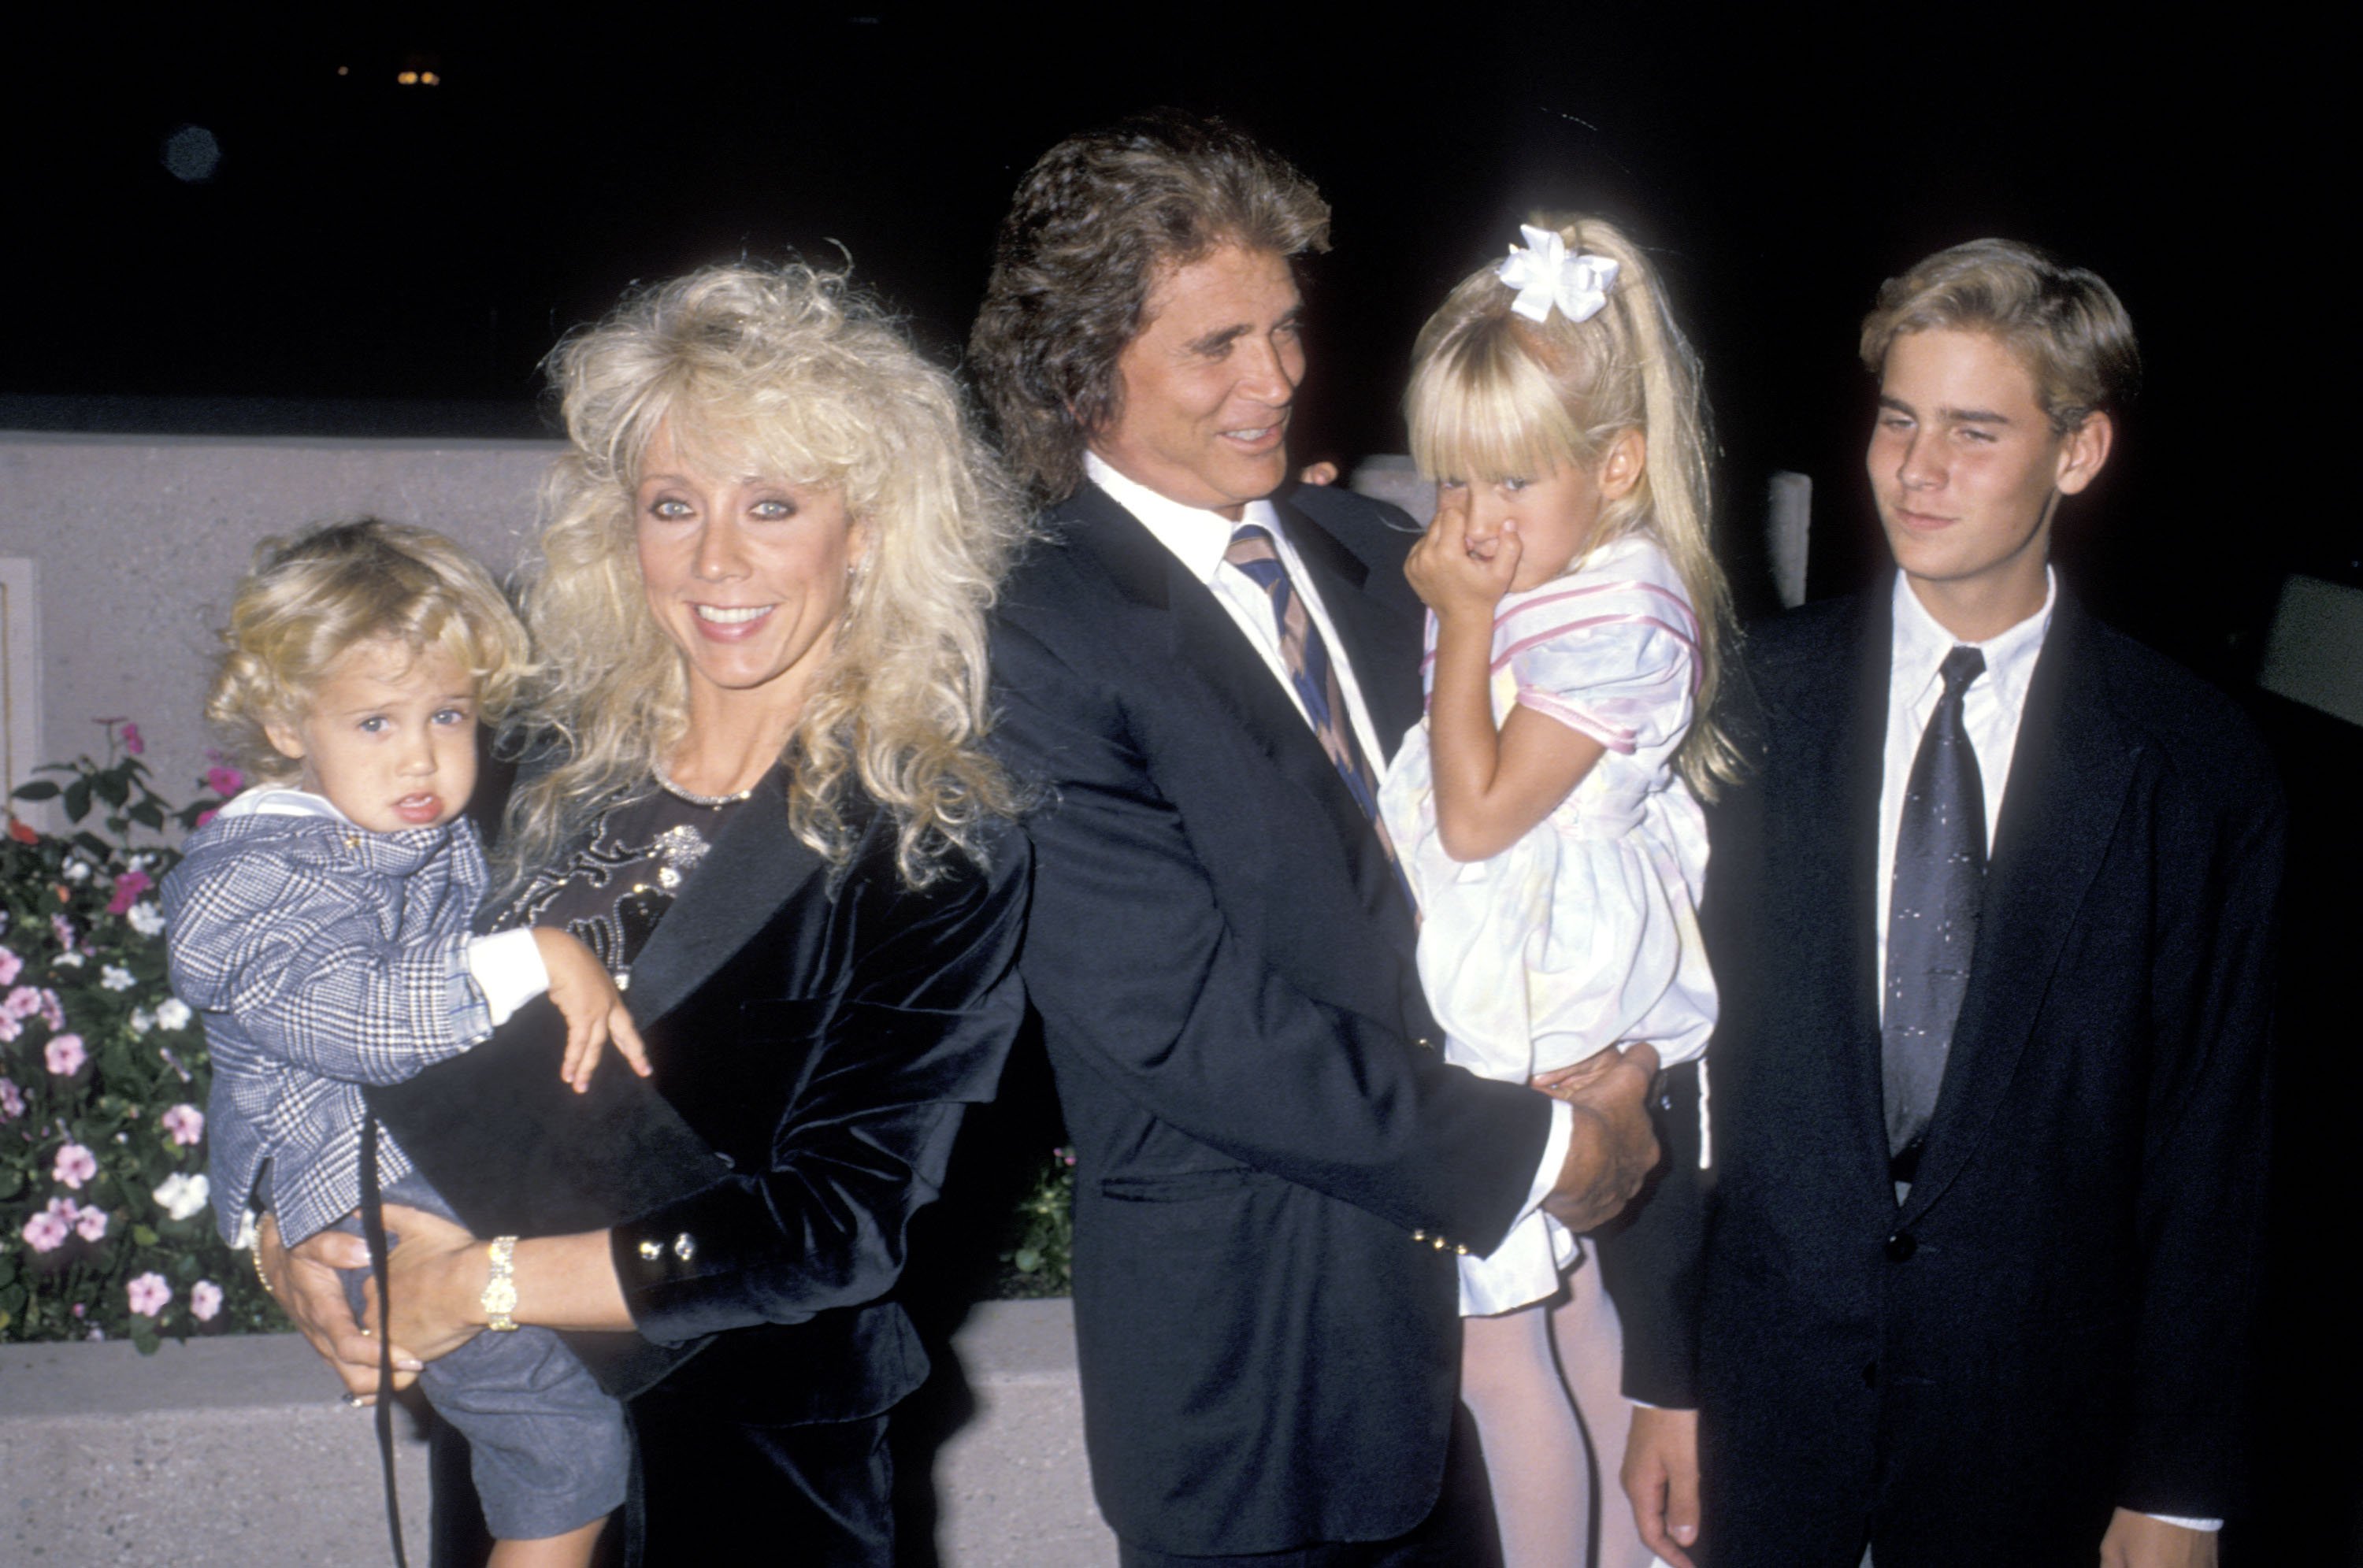 Michael, Cindy, Sean, Jennifer, and Christopher Landon at the National Down Syndrome Congress' Second Annual Celebrity Gala on October 15, 1988, in Culver City, California. | Source: Ron Galella/Ron Galella Collection/Getty Images